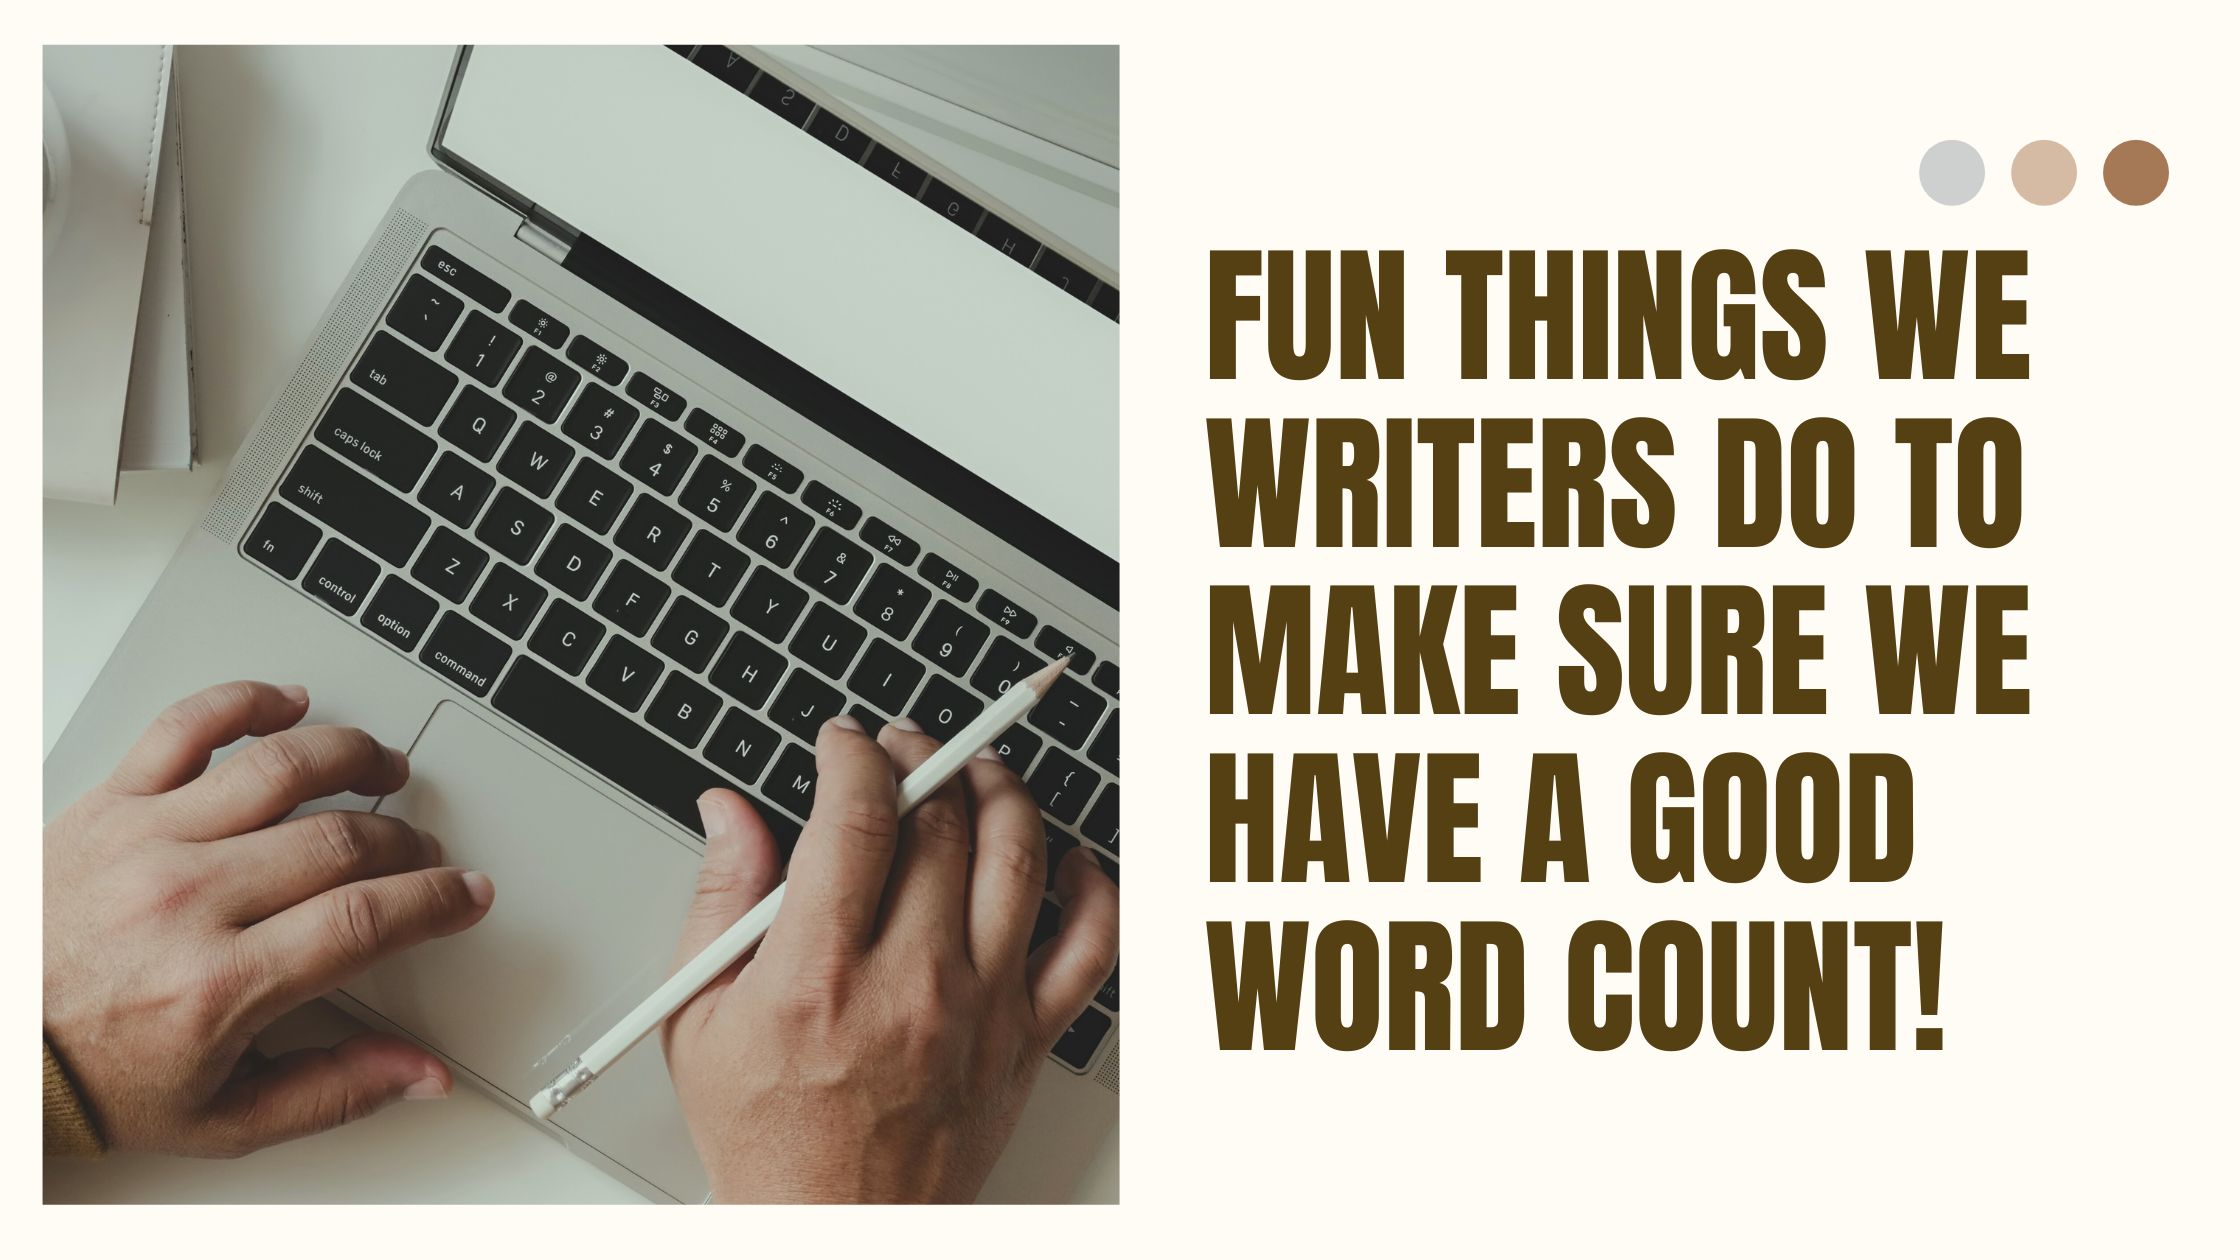 Fun things we writers do to make sure we have a good word count!